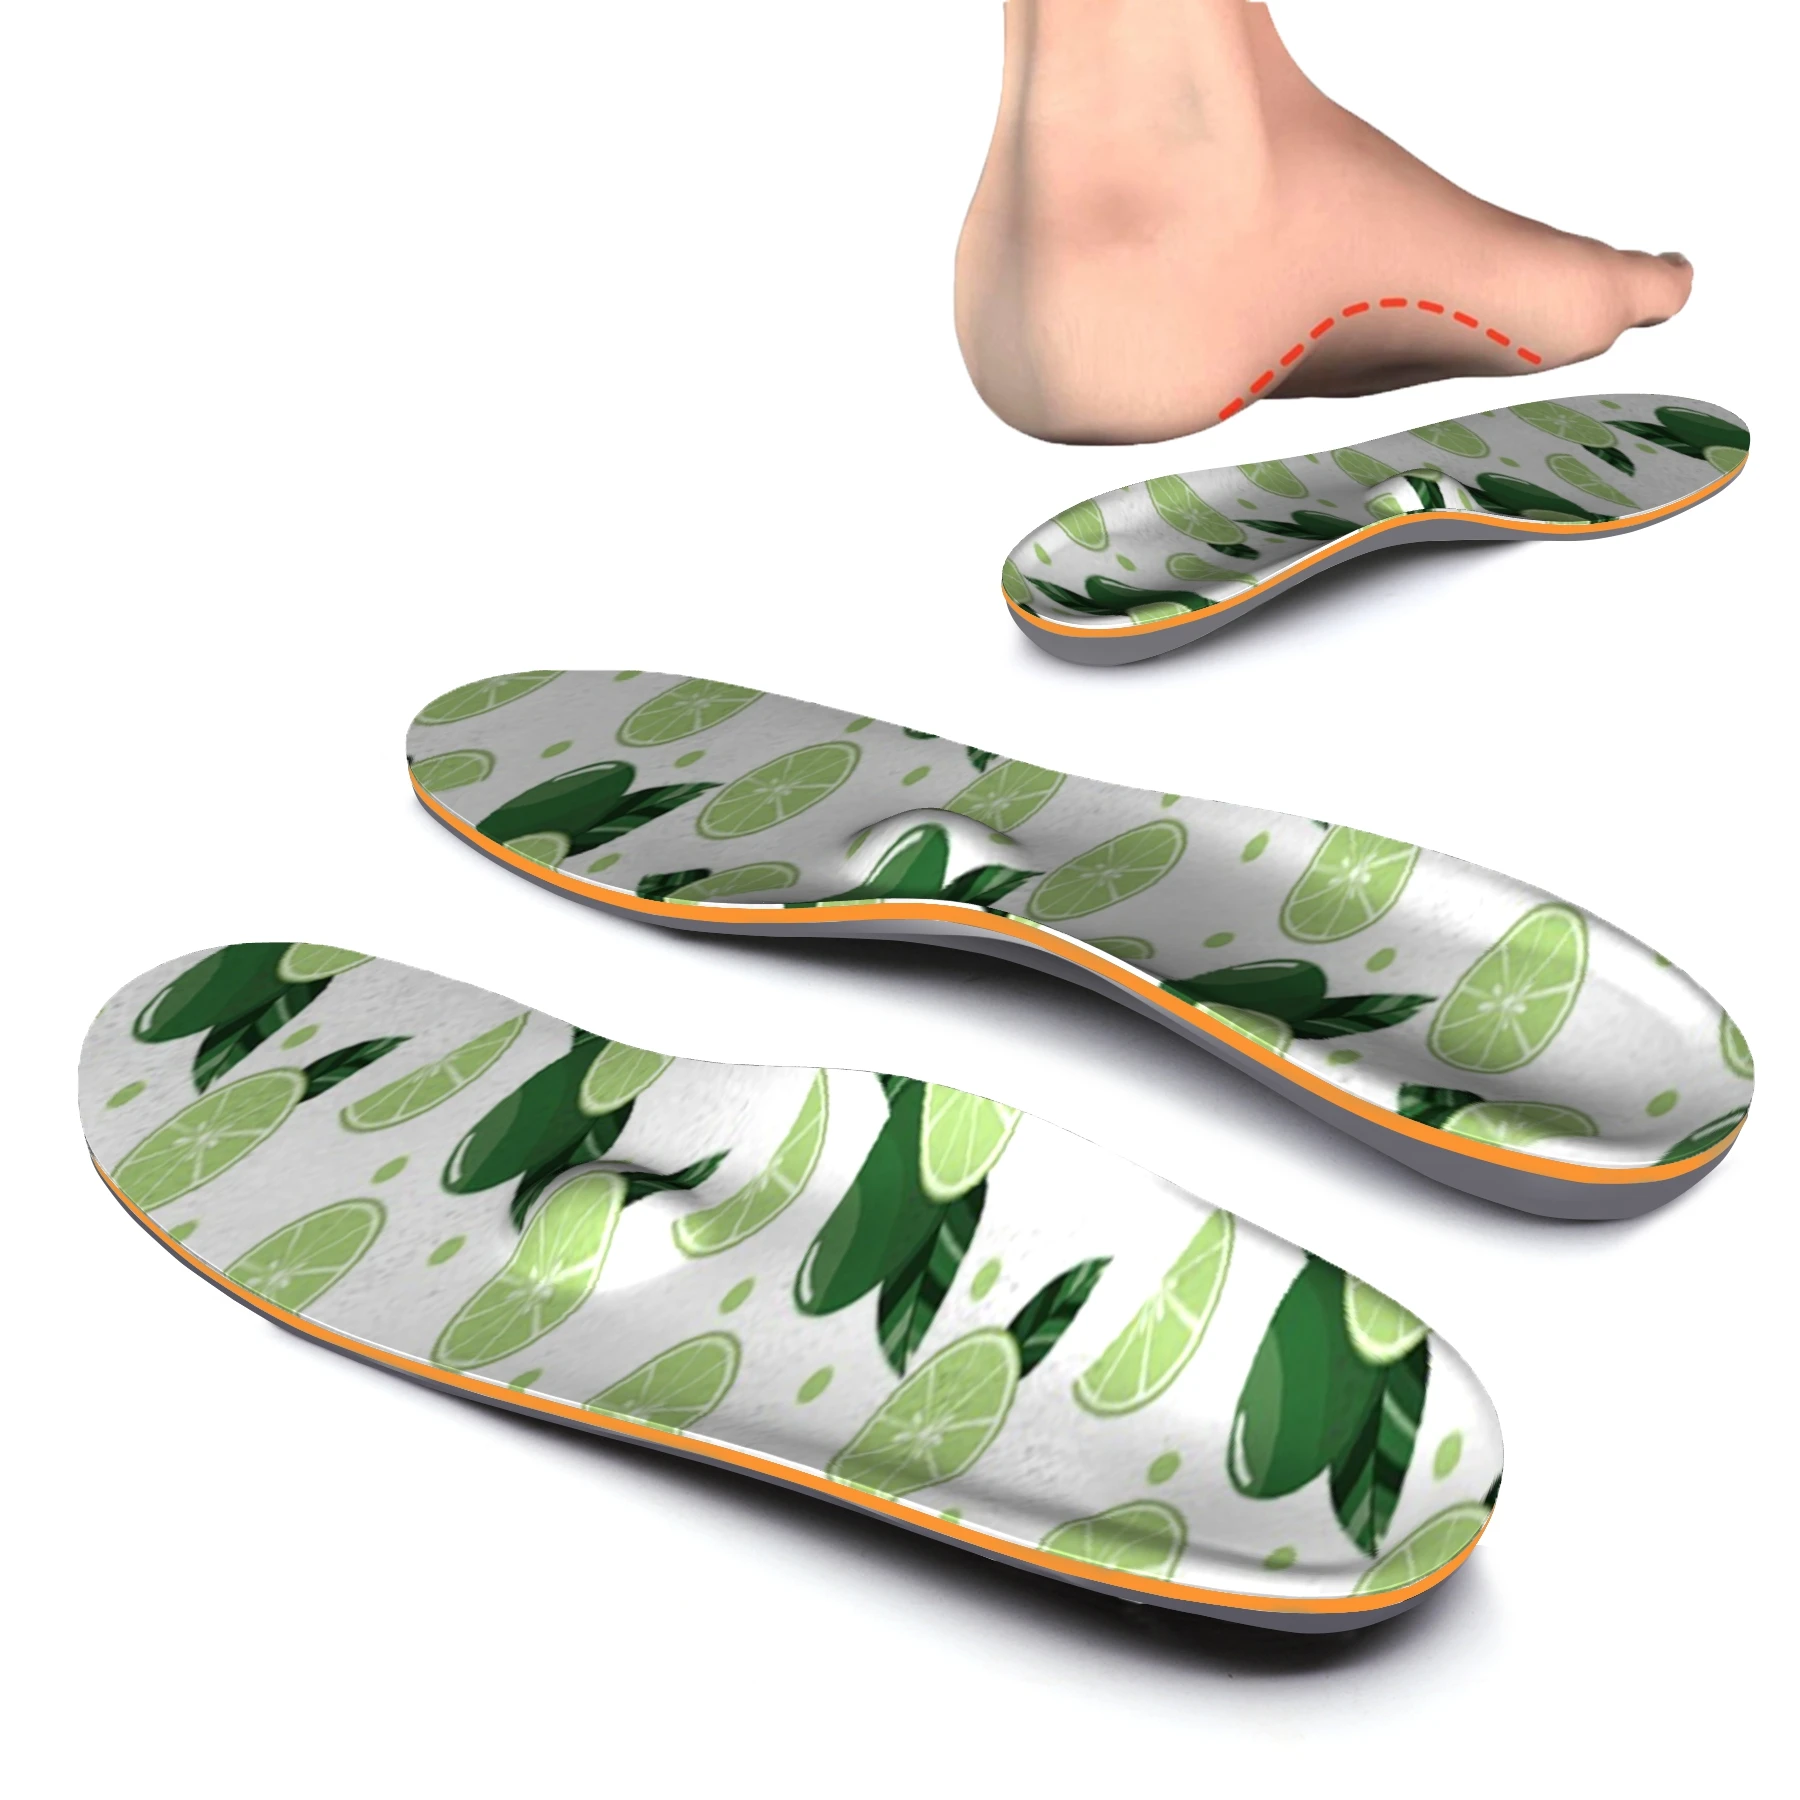 Green Pattern iFitna EVA-Orthotic Soft Insoles with Full Length, High Arch Foot, Metatarsal Support and Heel Pain for Men Women